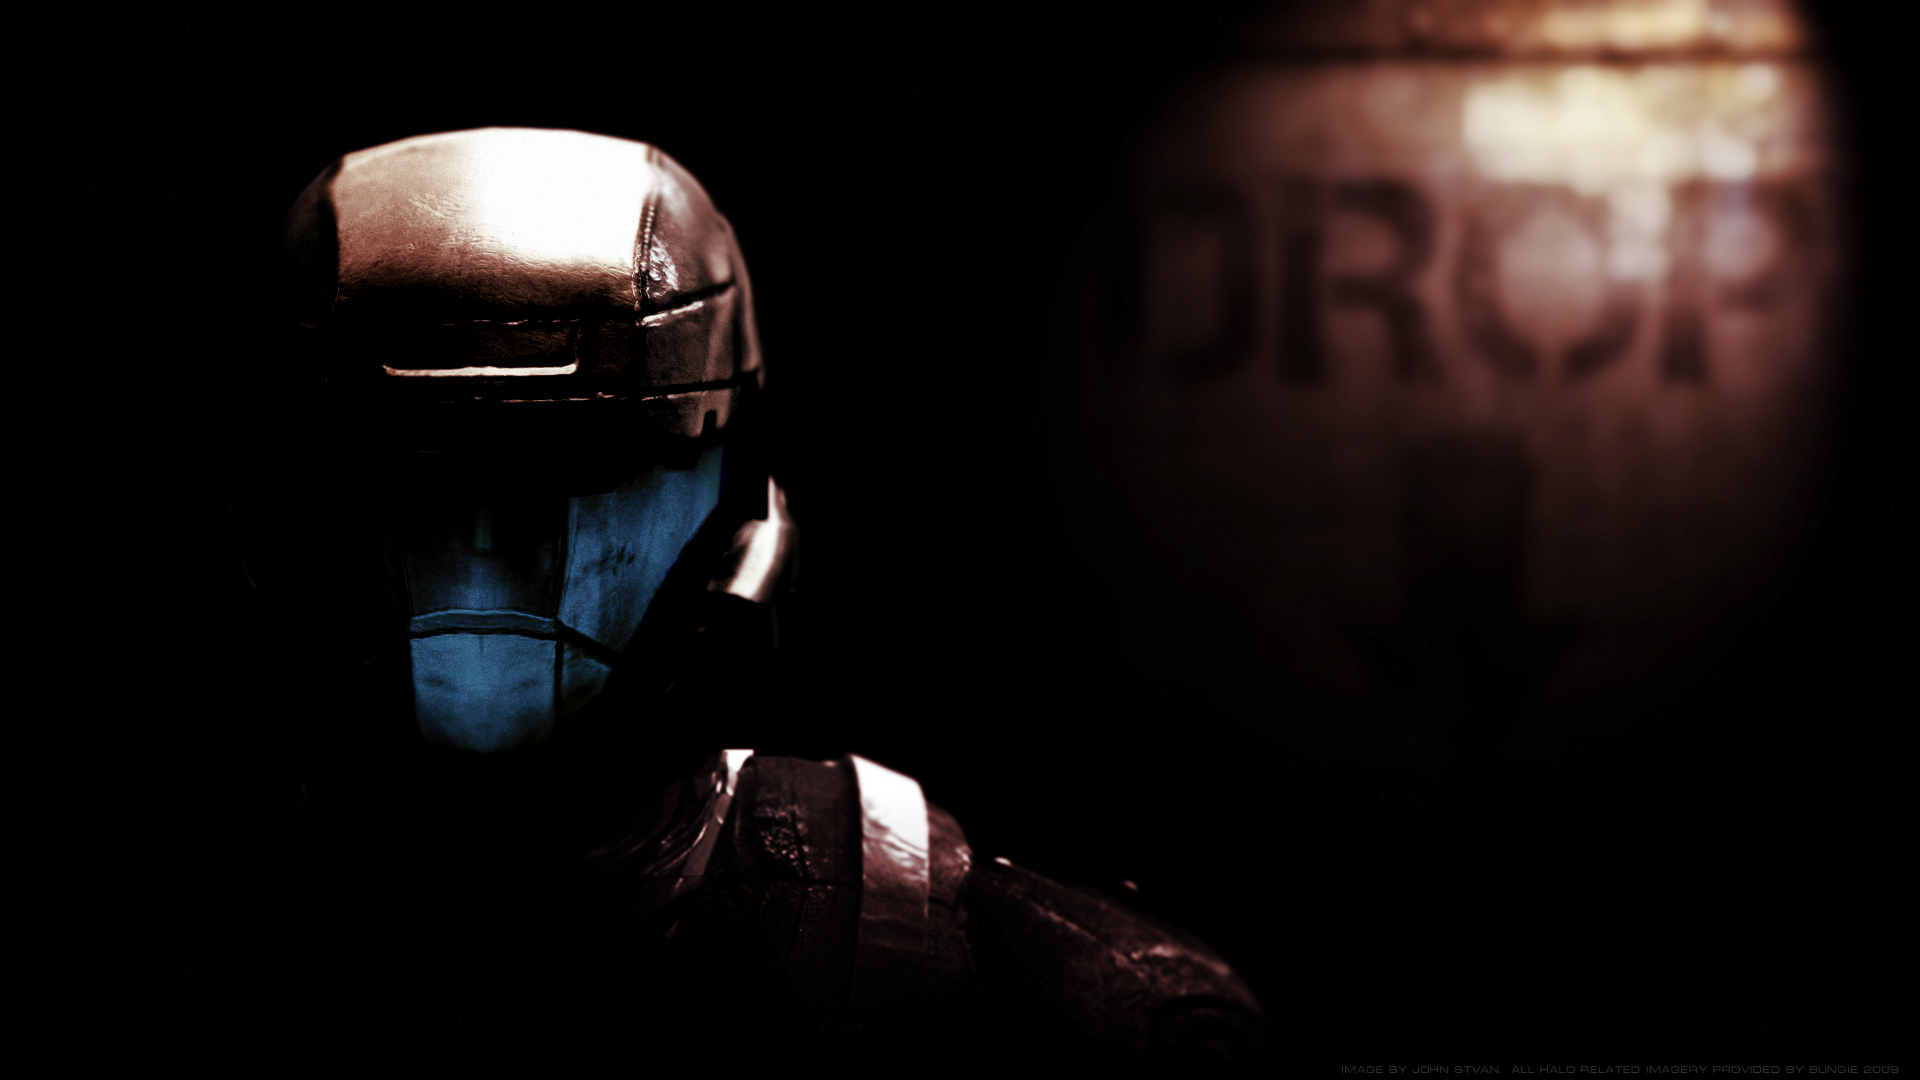 7 Halo 3: ODST HD Wallpapers | Backgrounds - Wallpaper Abyss